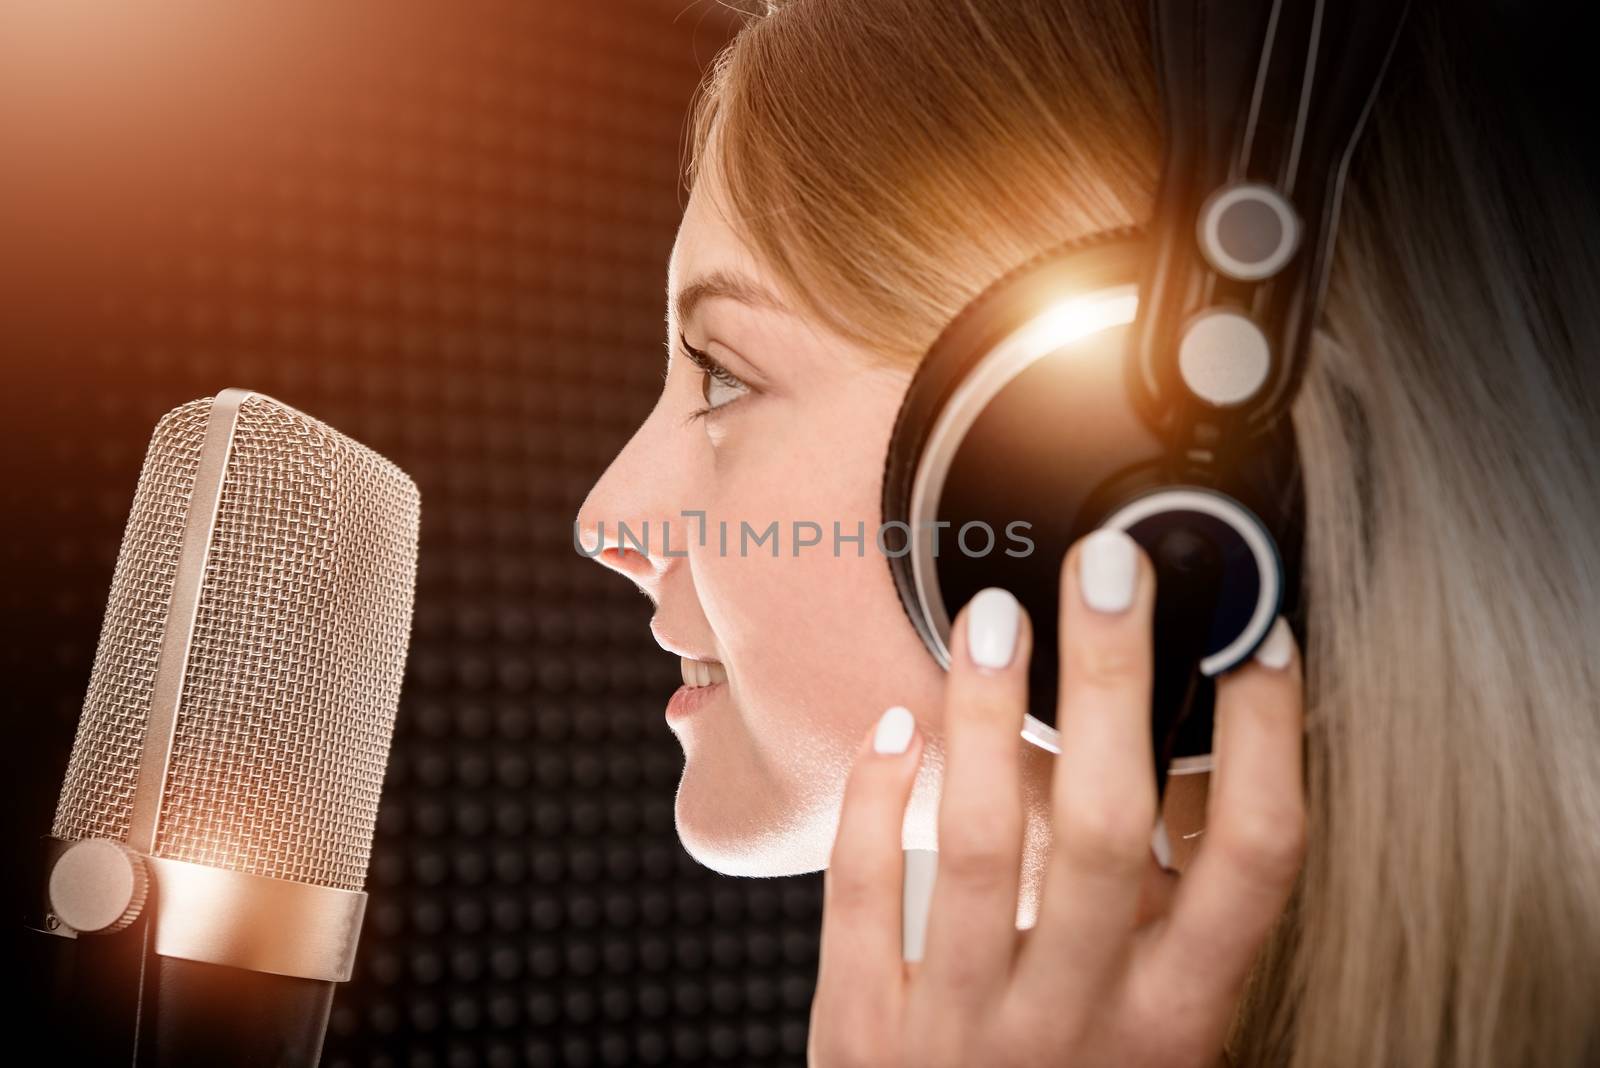 Female Voice Talent in Studio by welcomia